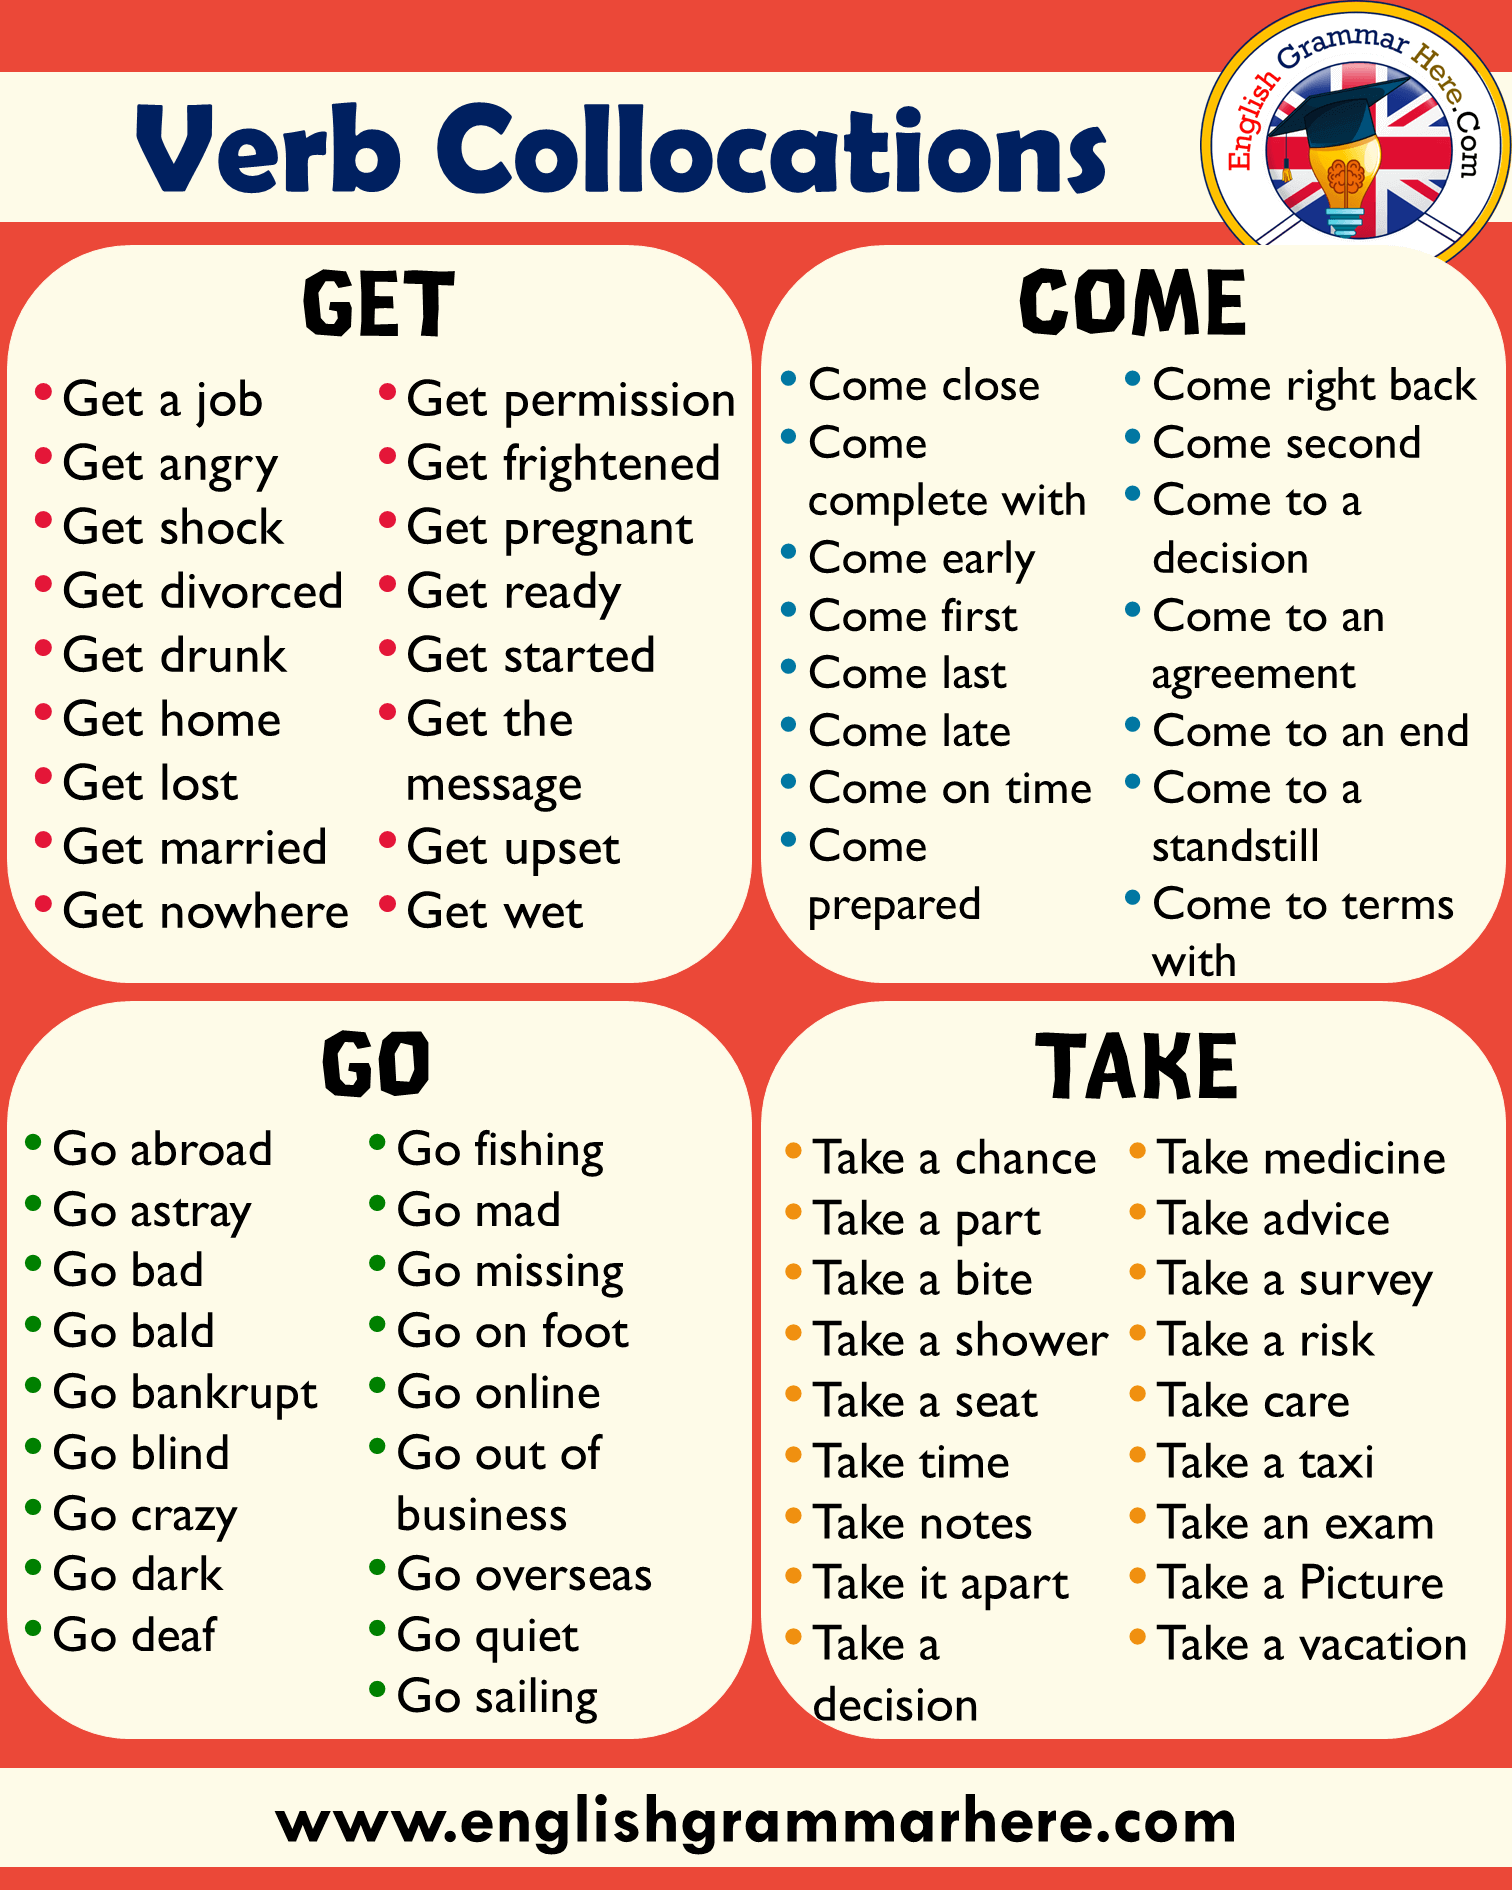 English Verb Collocations with TAKE, GO, COME, GET List;